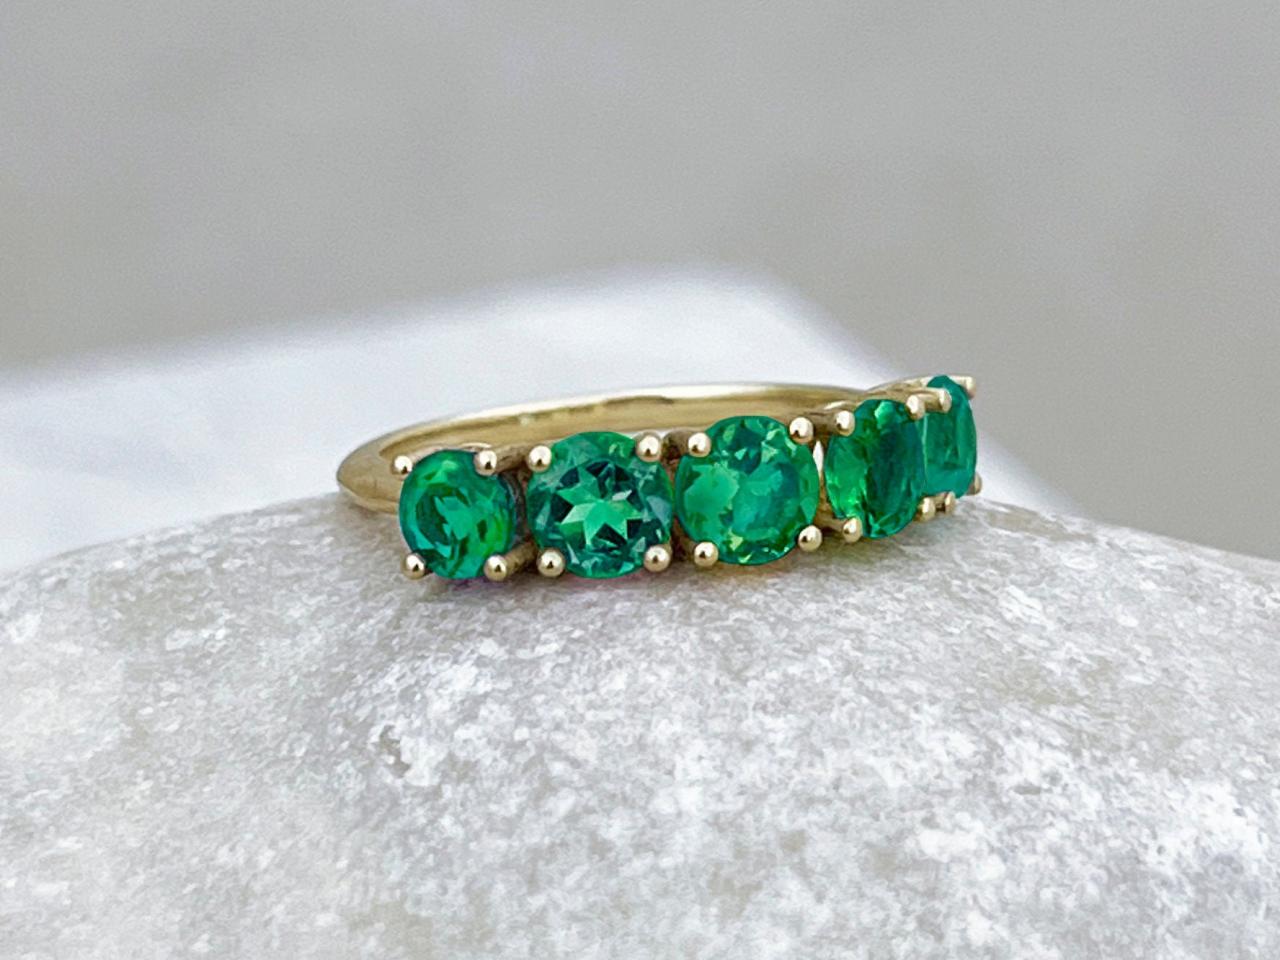 Solid gold engagement ring with natural emerald, Wedding half band ring with green stones, 9k/18k classic prong setting promise ring